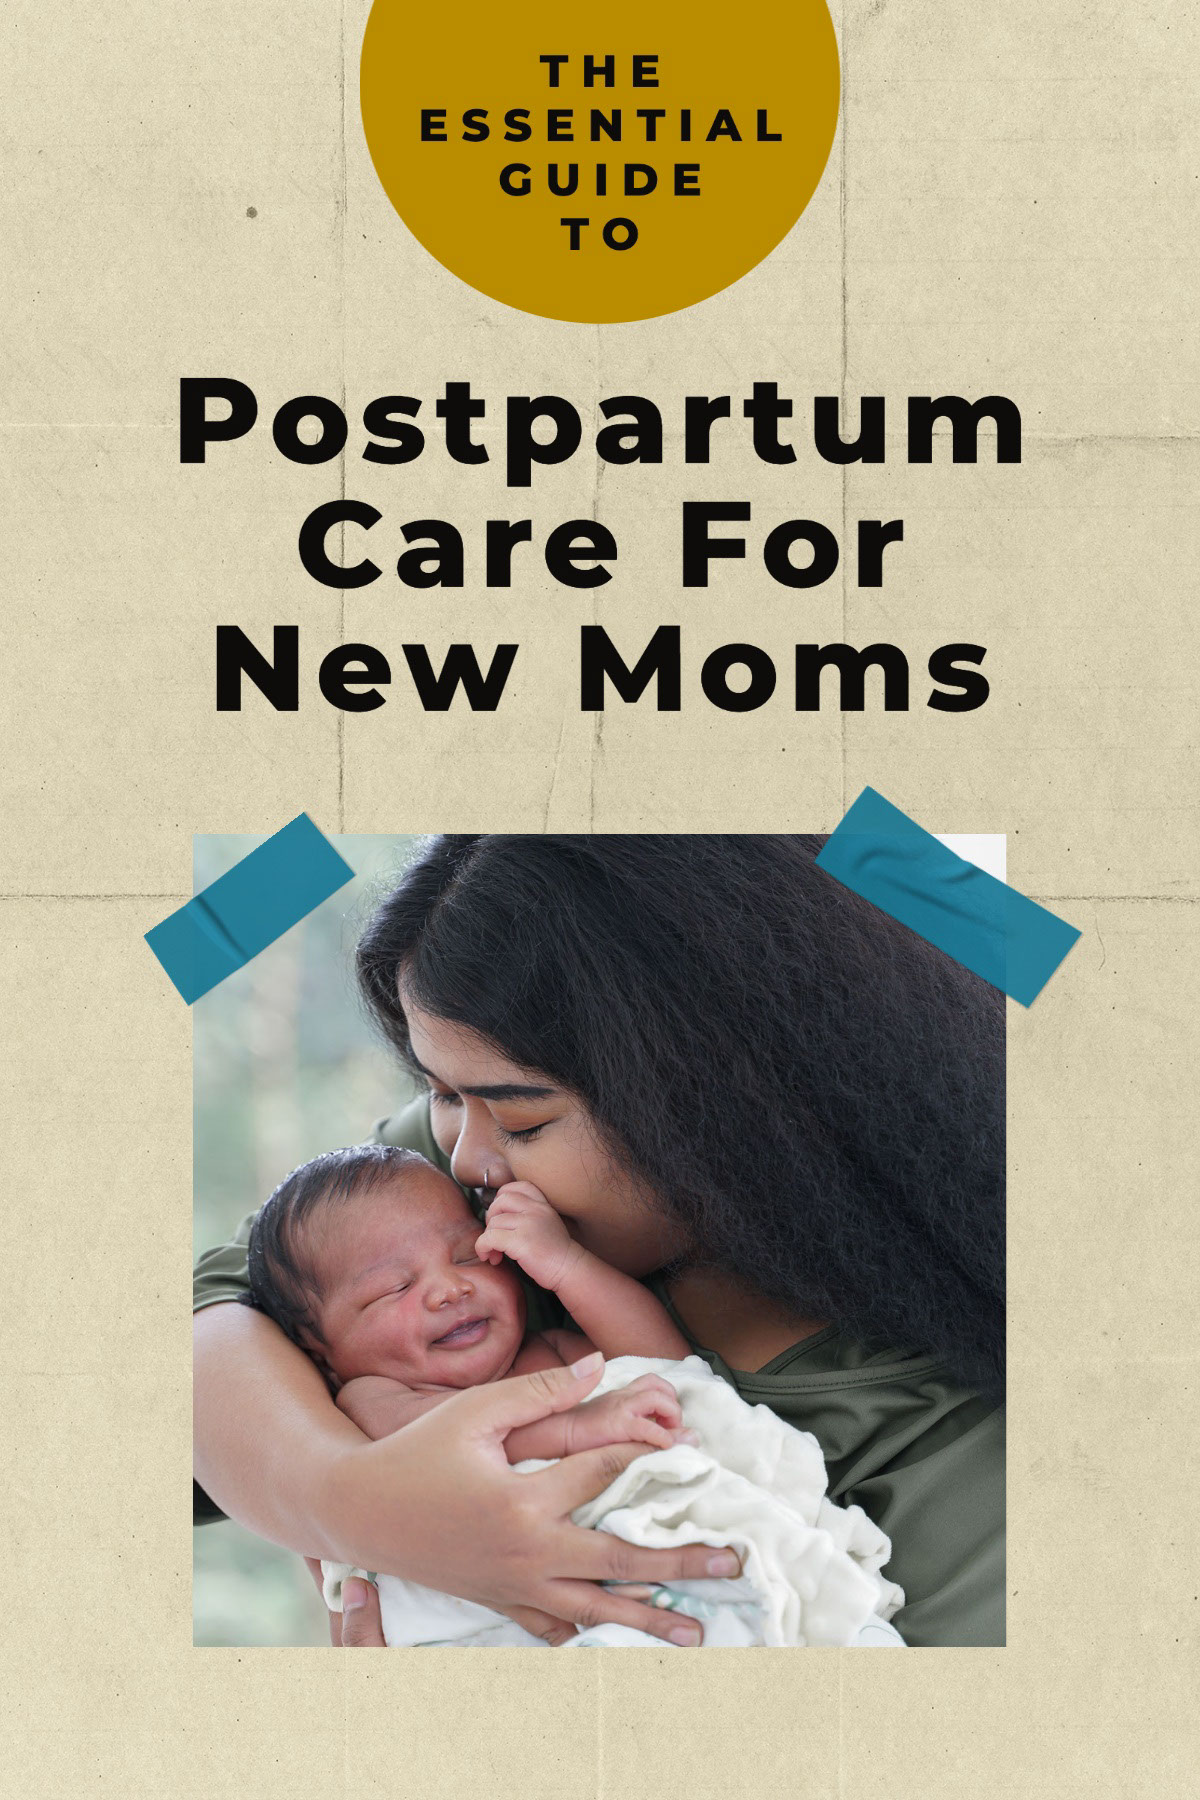 Beige and Teal Postpartum Care for New Moms Pinterest Post Postpartum Care For New Moms THE ESSENTIAL GUIDE TO